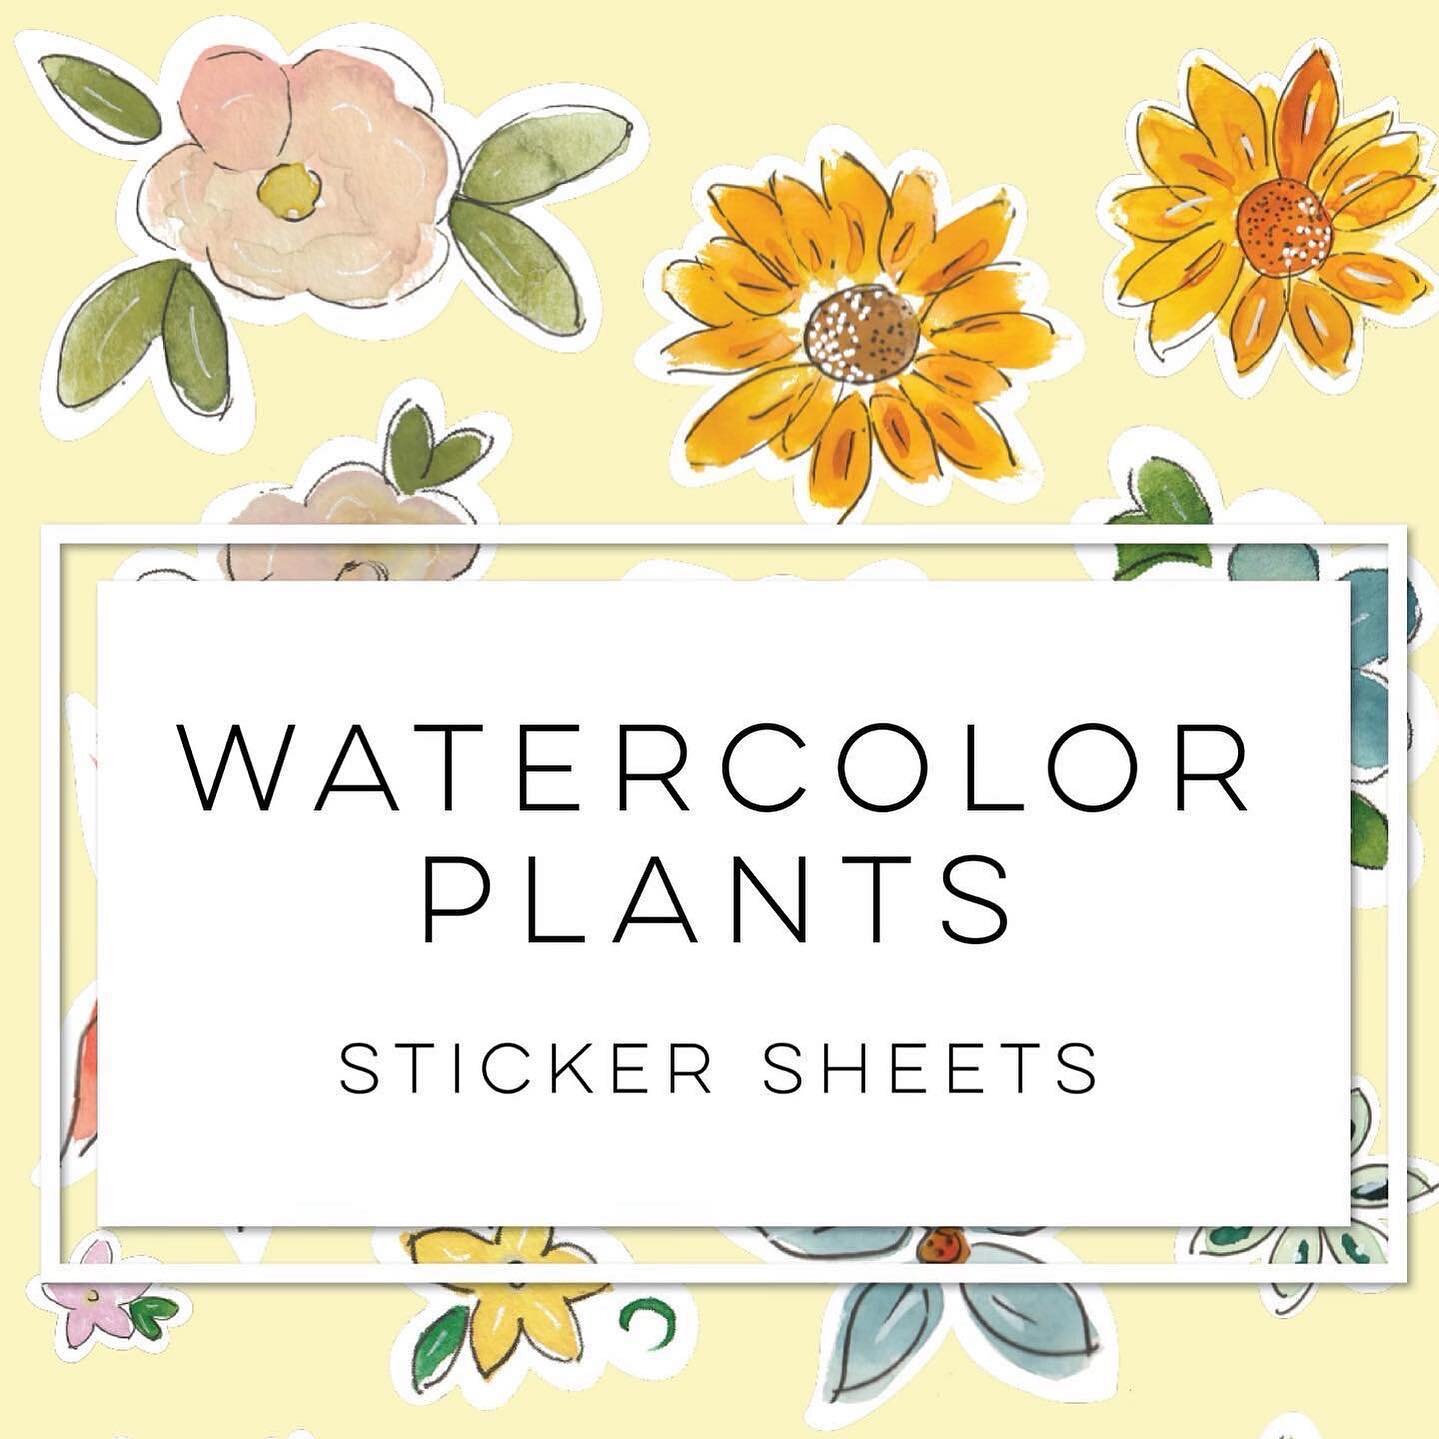 Watercolored flower stickers? Yes, please!